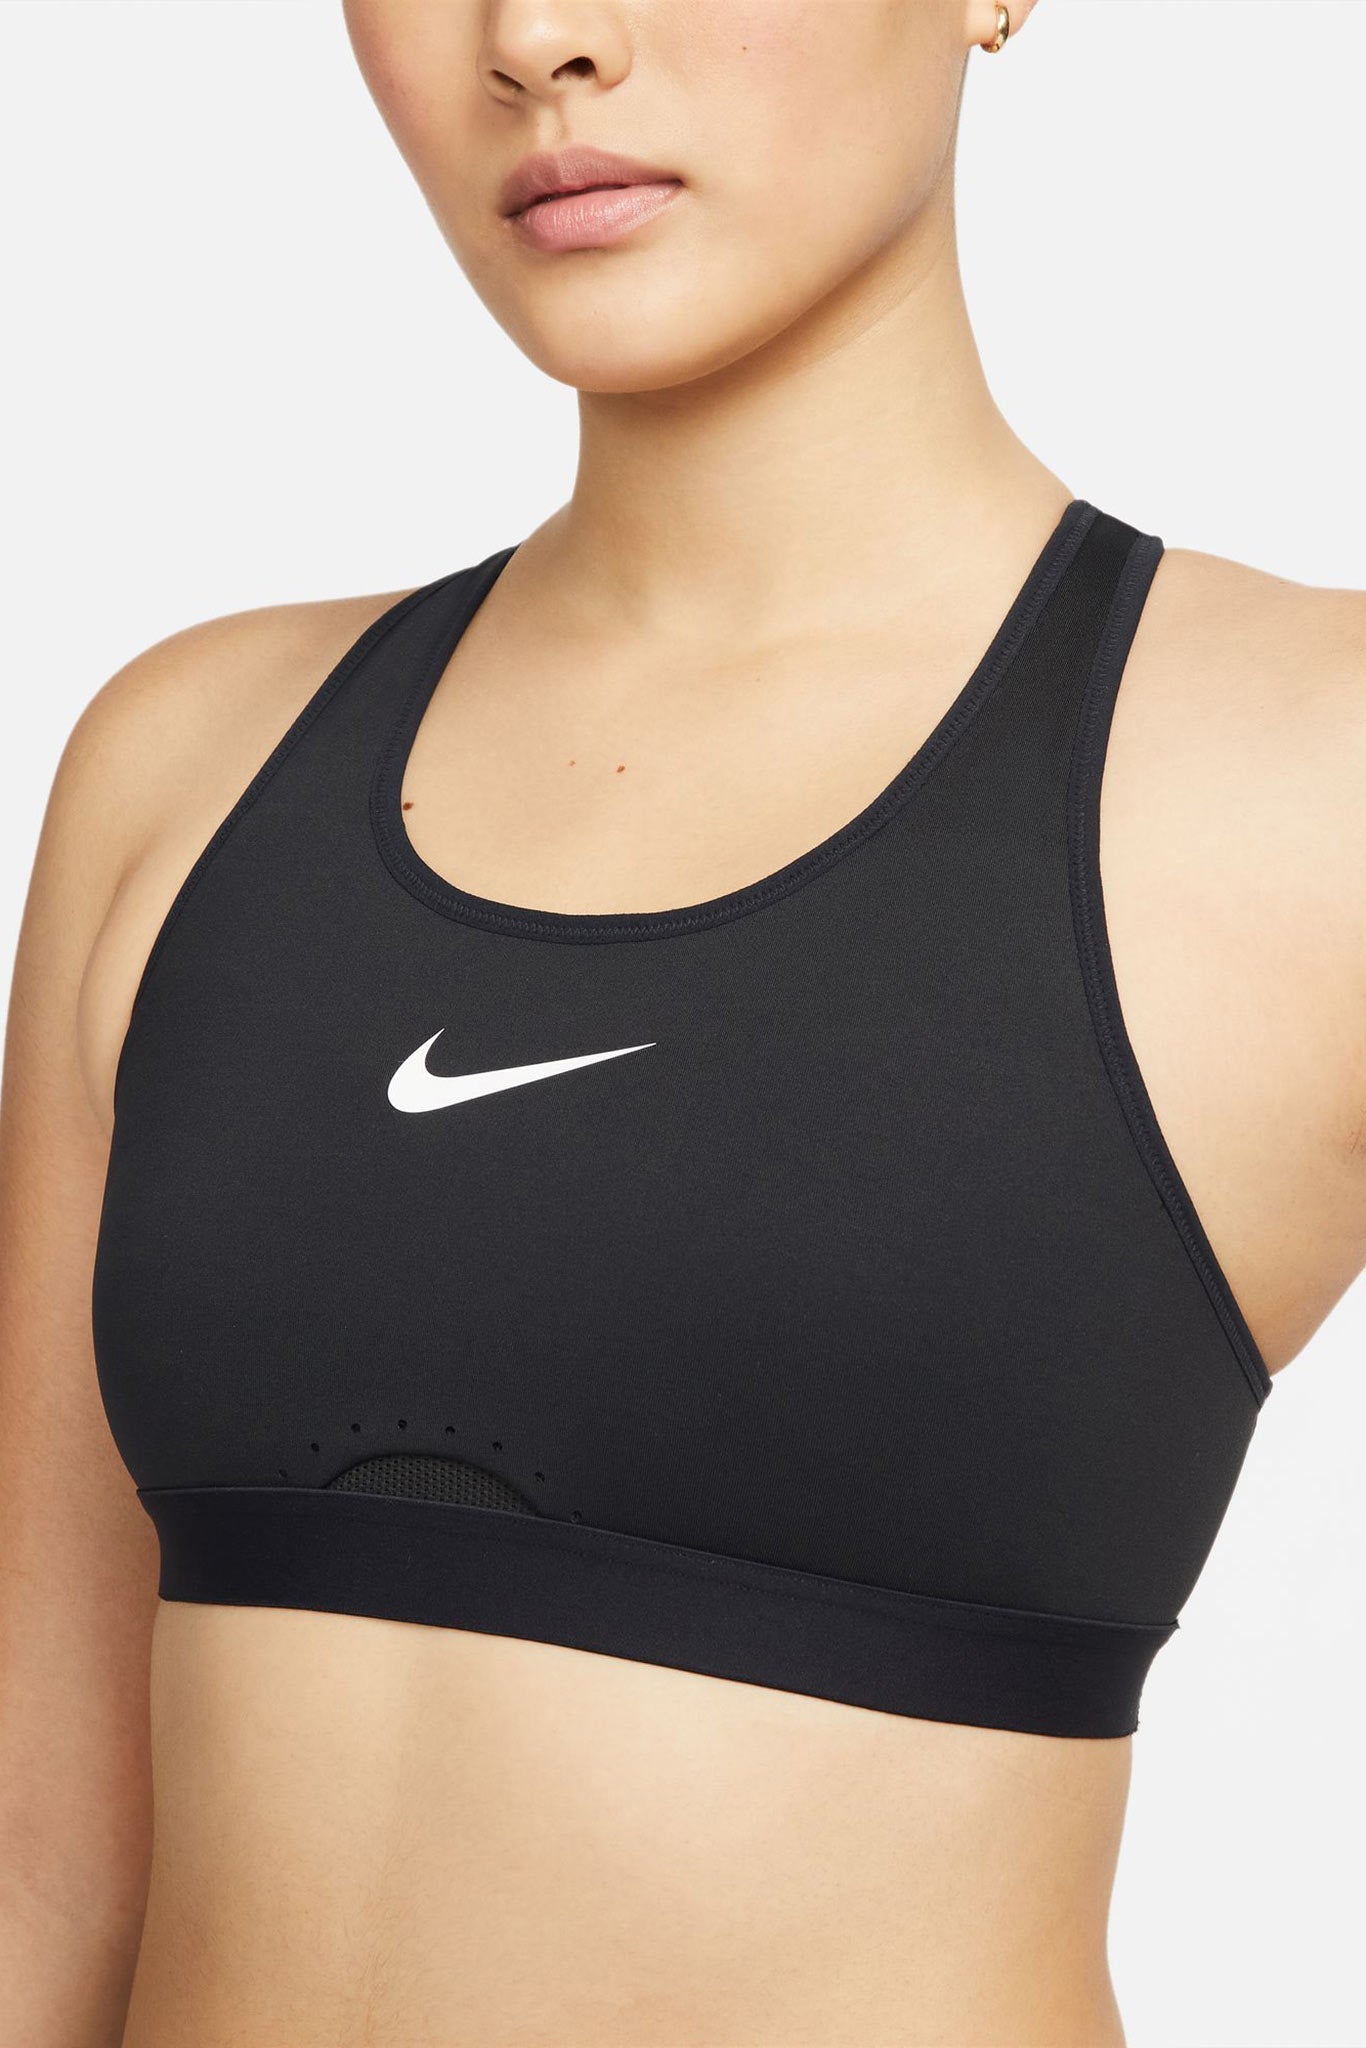 Nike / Women's Dri-FIT Swoosh High-Support Non-Padded Racerback